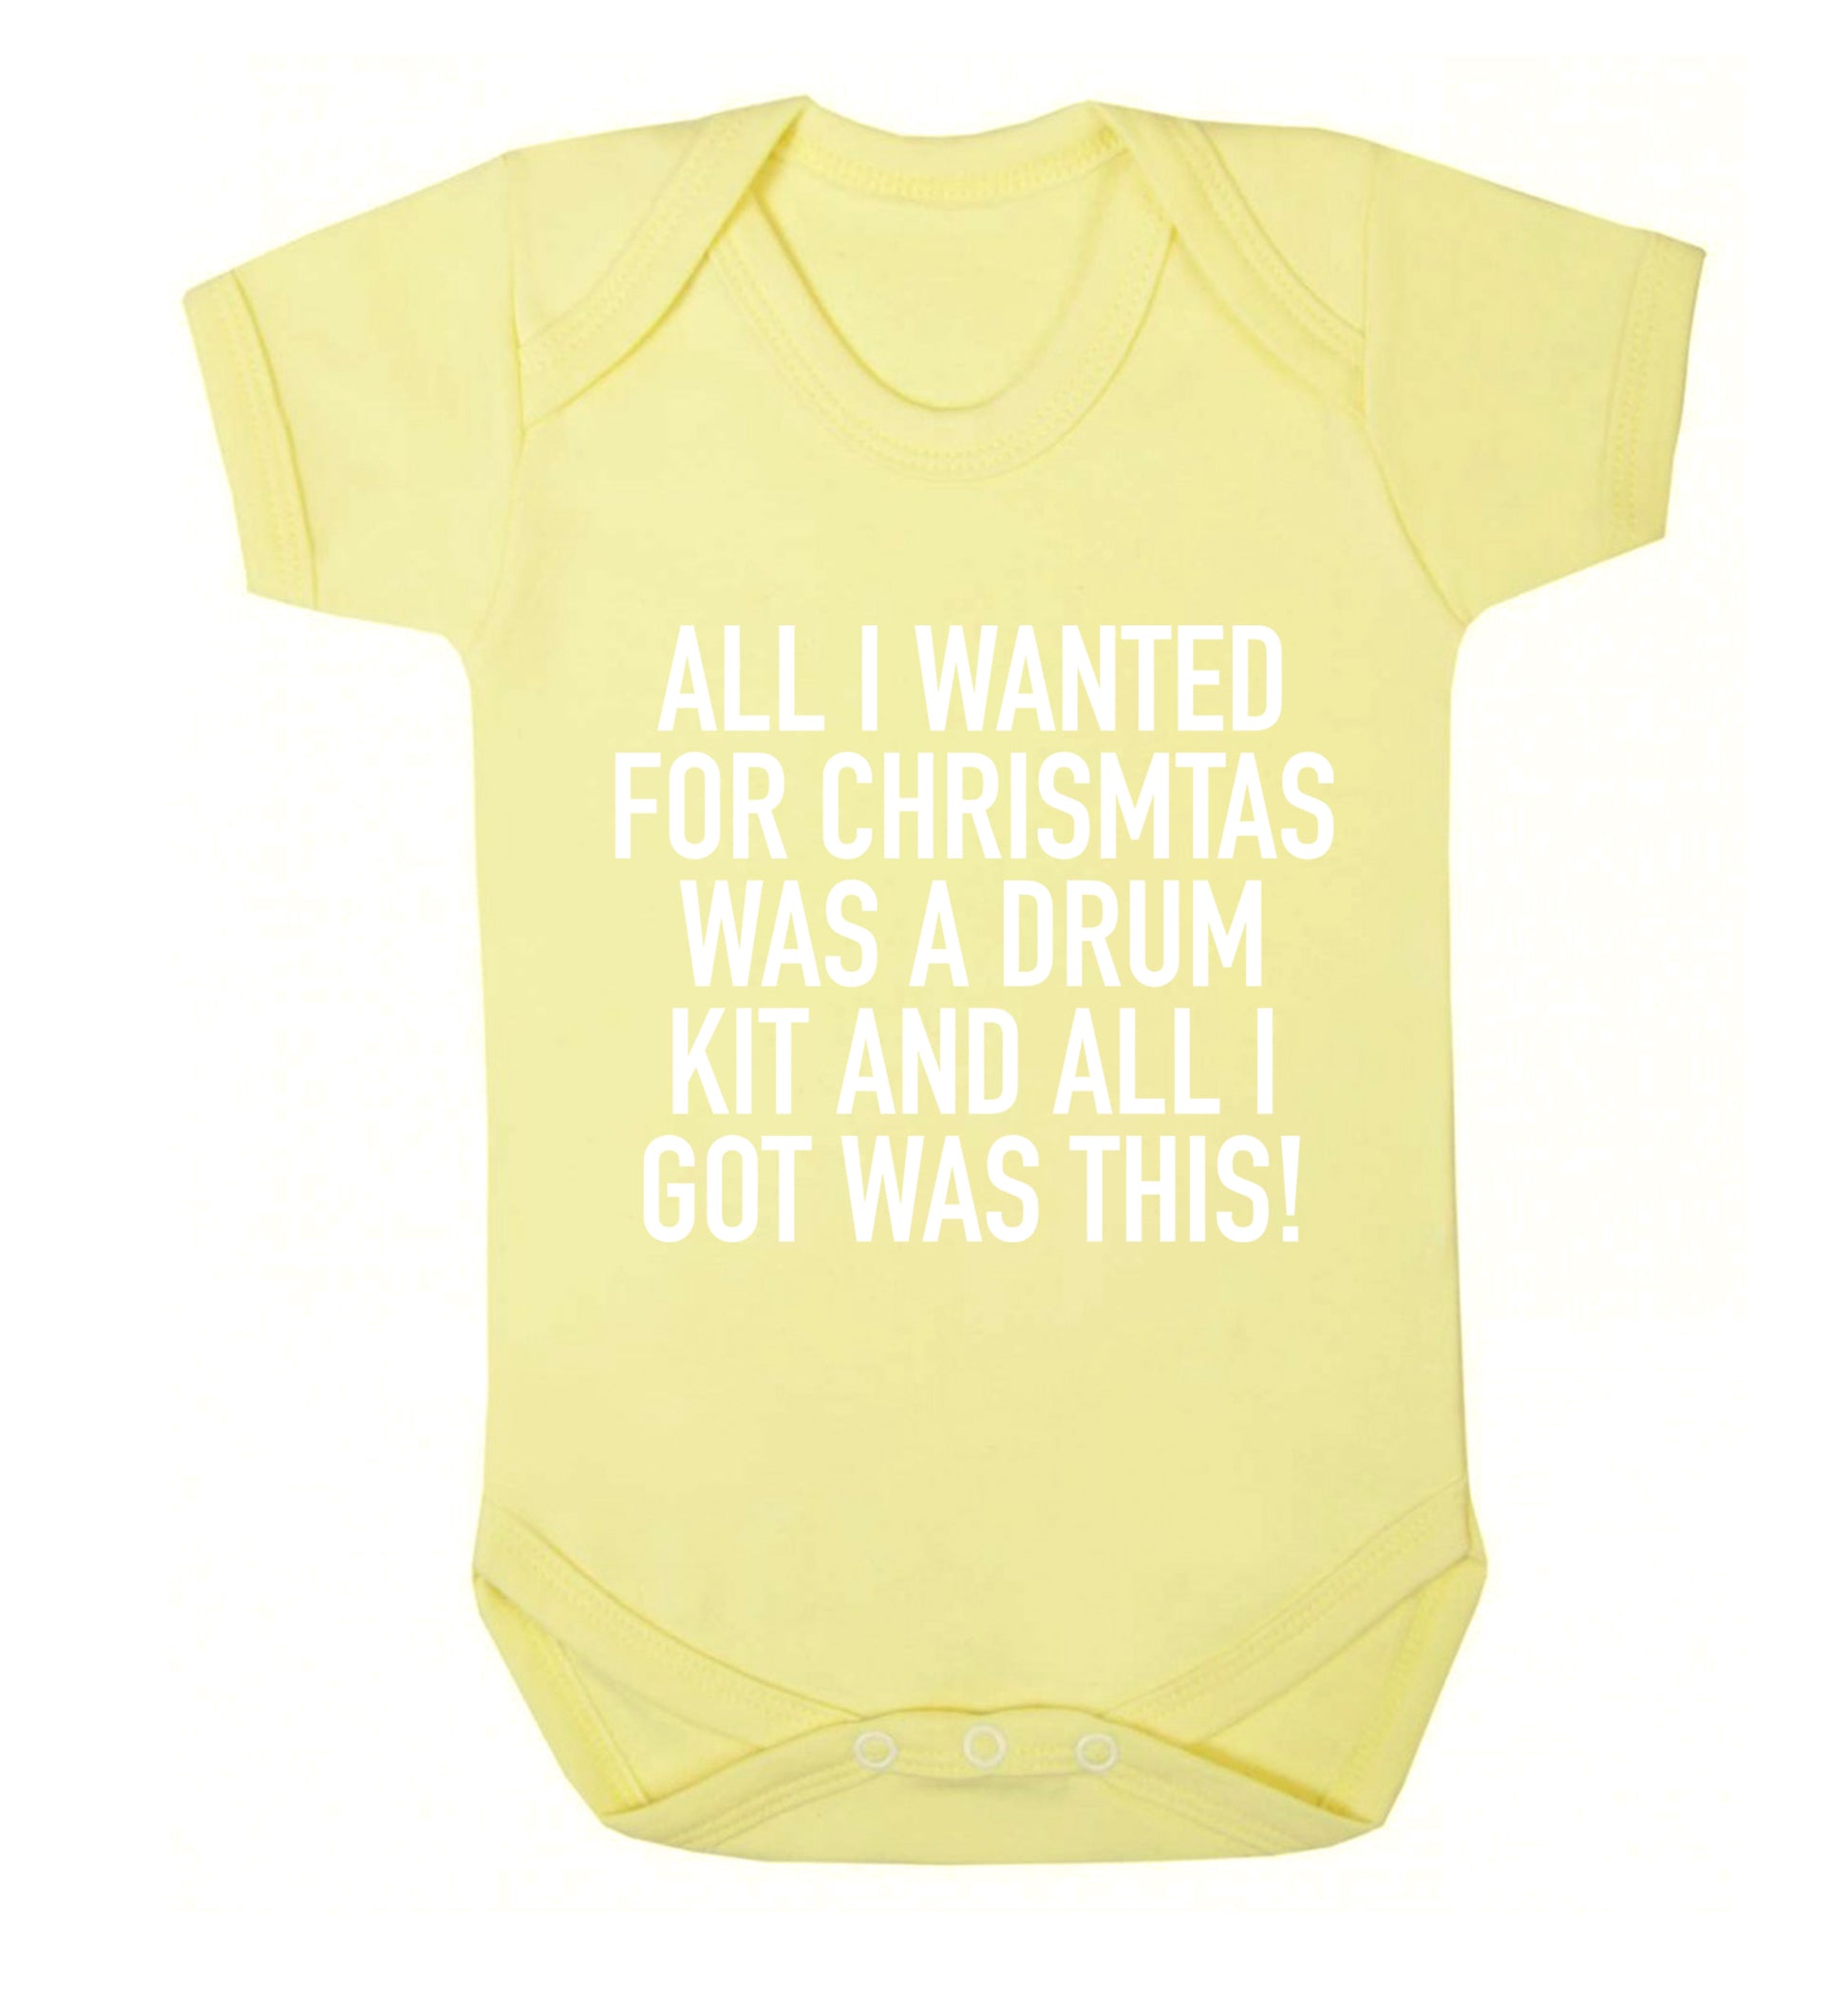 All I wanted for Christmas was a drum kit and all I got was this! Baby Vest pale yellow 18-24 months